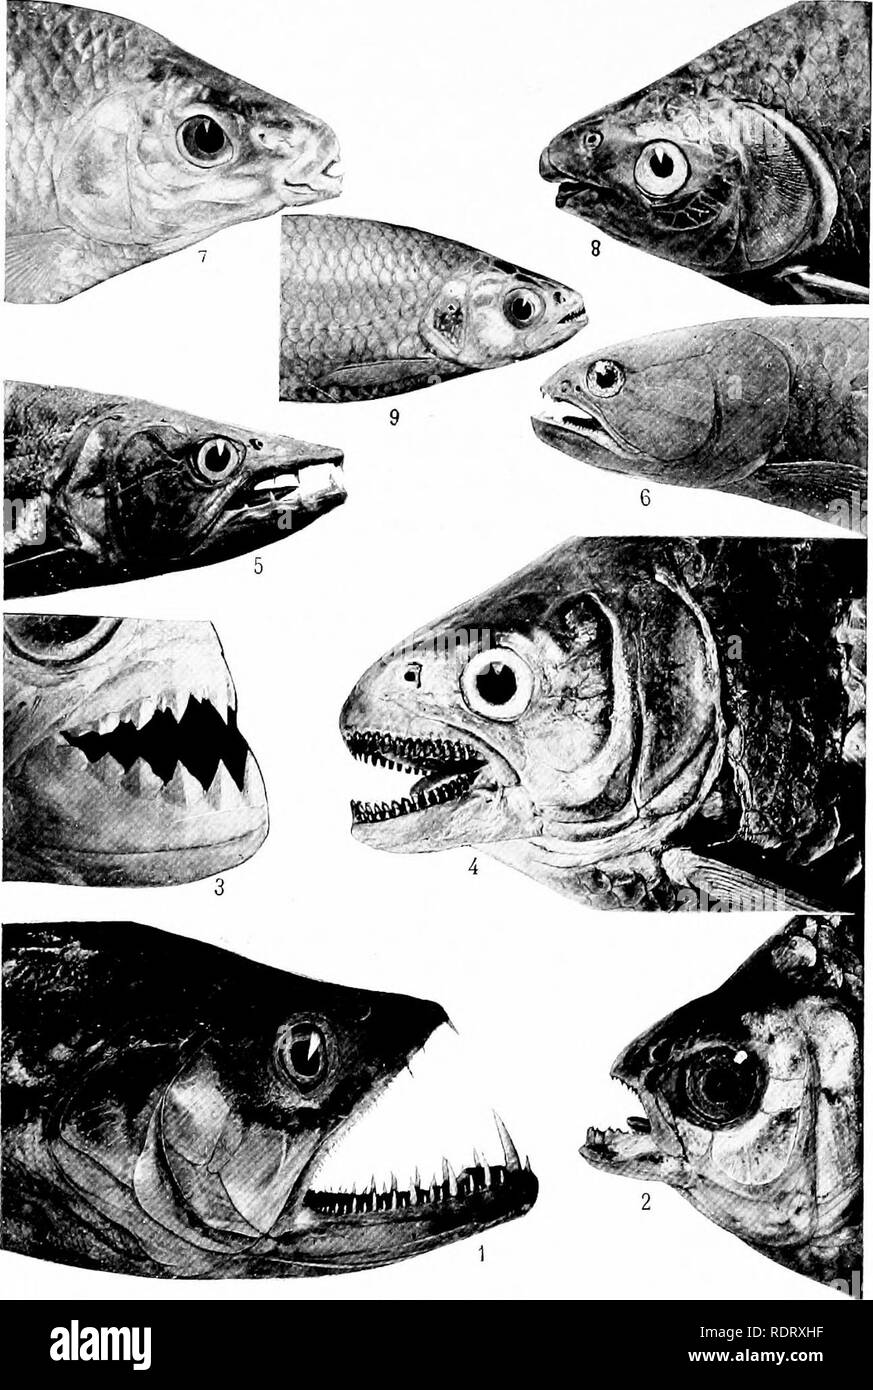 . Fifty years of Darwinism : modern aspects of evolution ; centennial addresses in honor of Charles Darwin, before the American Association for the Advancement of Science, Baltimore, Friday, January 1, 1909. Darwin, Charles, 1809-1882; Evolution. PLATE III. A Few of the Numeuous Types of Teeth in the Characins. (&quot;From photographs by the authof ) 1. Ruphiodon viilpinus Spis. 2. Astyiuiiix bimaciilattis brevoortii Gill. 3. Serrasalmo humeraJie Cuv. &amp;. Val. 4. Ileiiochilne wheatlandi Garmaii. 5. Acestrorhynchiis falcatus Bloch. ti. Iloplerythriniiw unitceniafii&amp; Spi.x. (Head rescmbk- Stock Photo